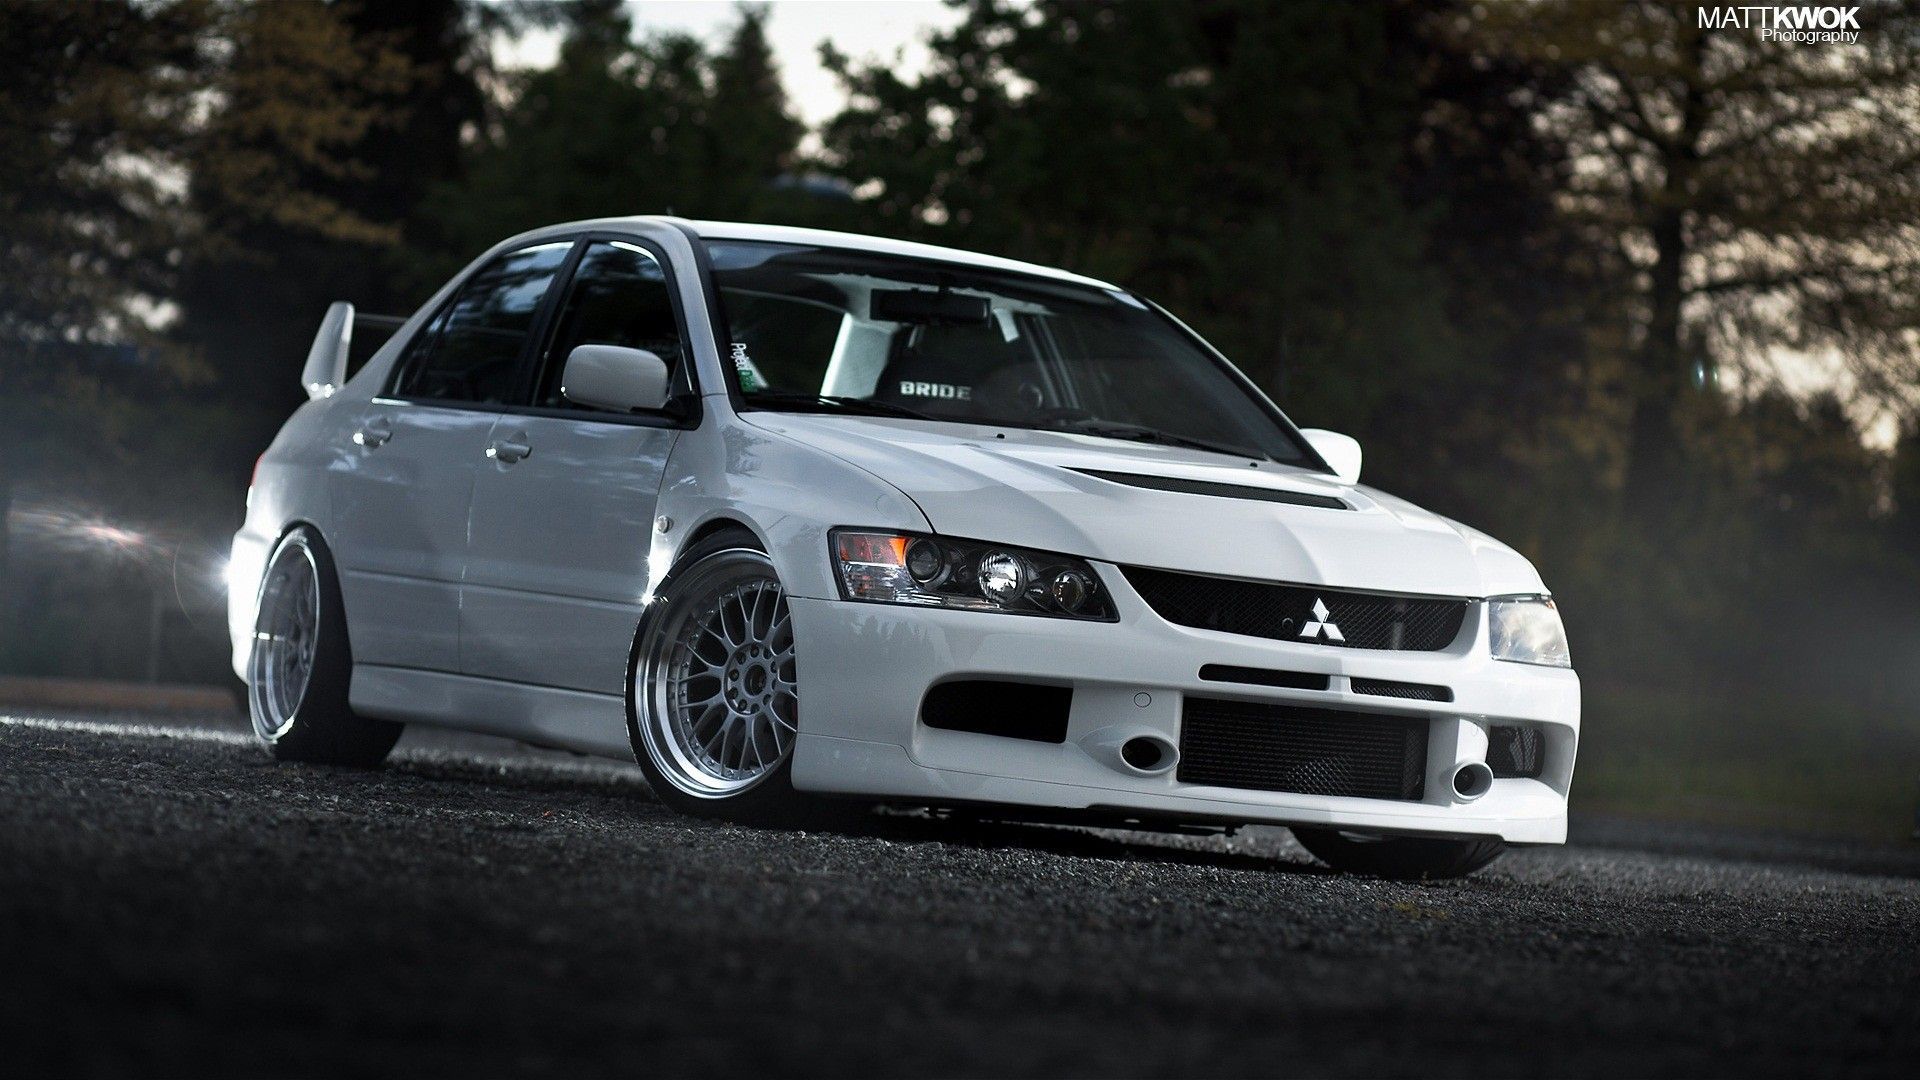 15 Of The Sickest JDM Cars You Can Buy For Under $15,000